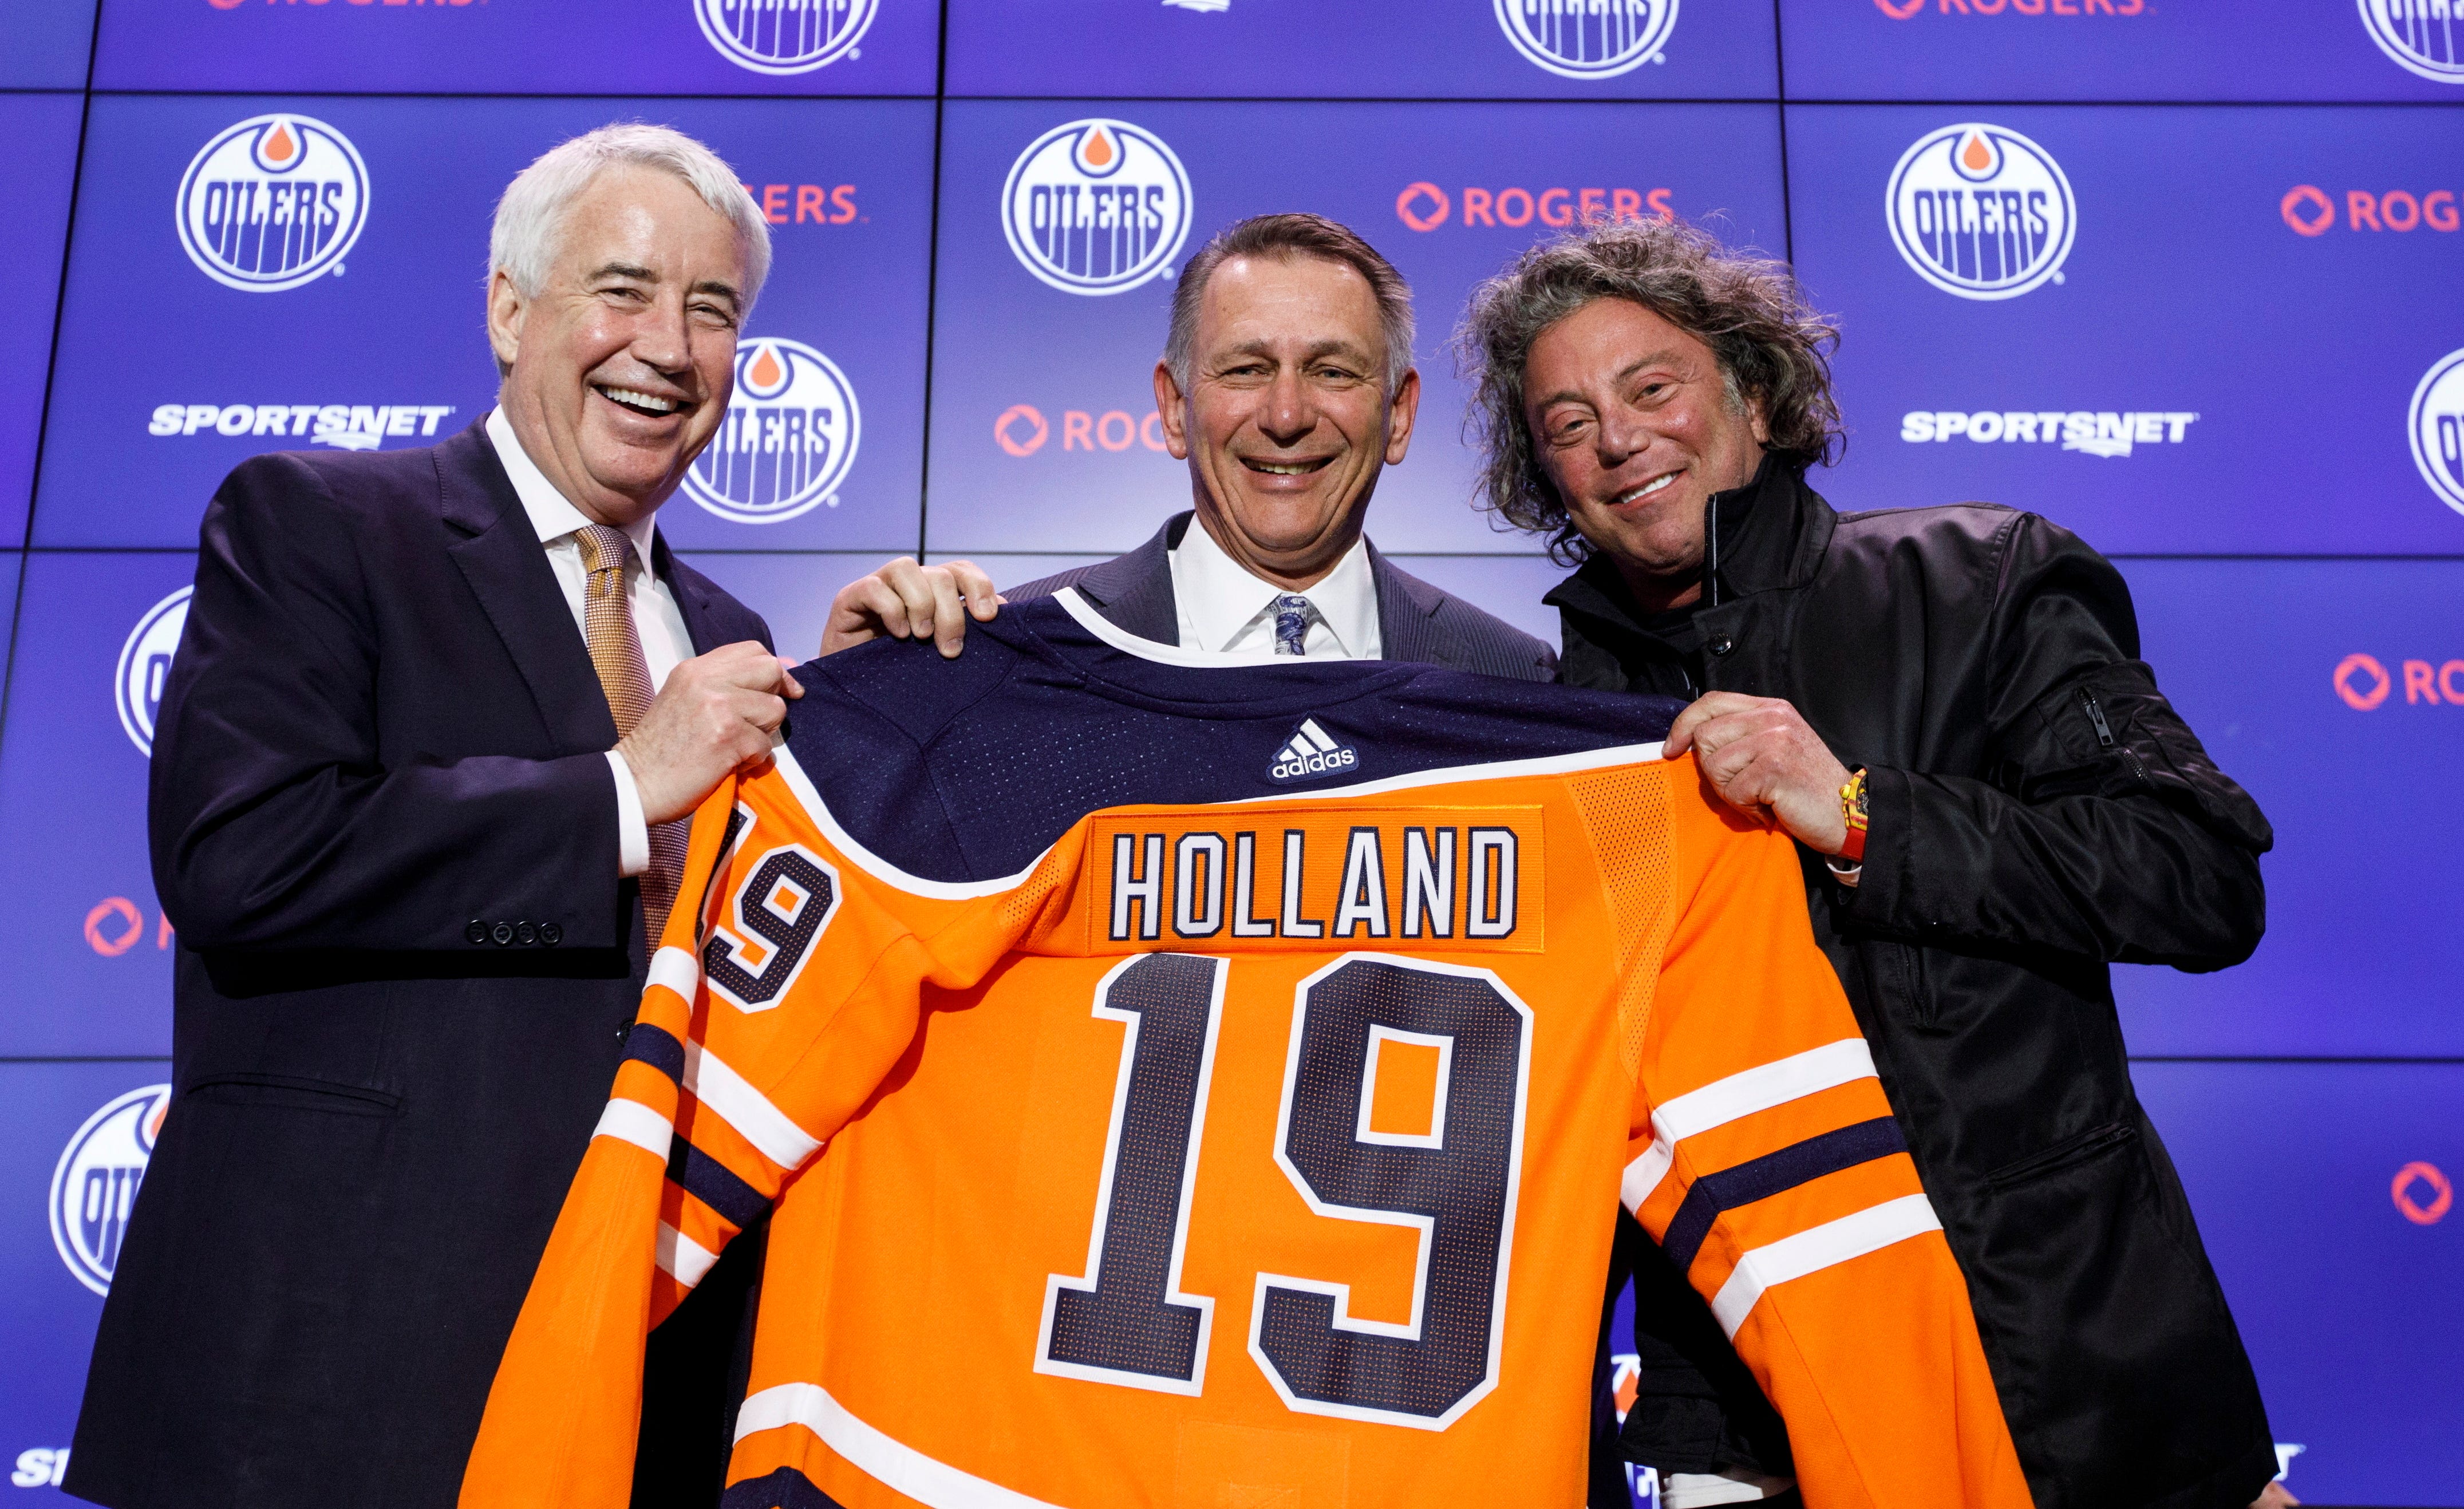 Ken Holland, center, is introduced as new Oilers GM by vice-chair Bob Nicholson, left, and owner Daryl Katz.